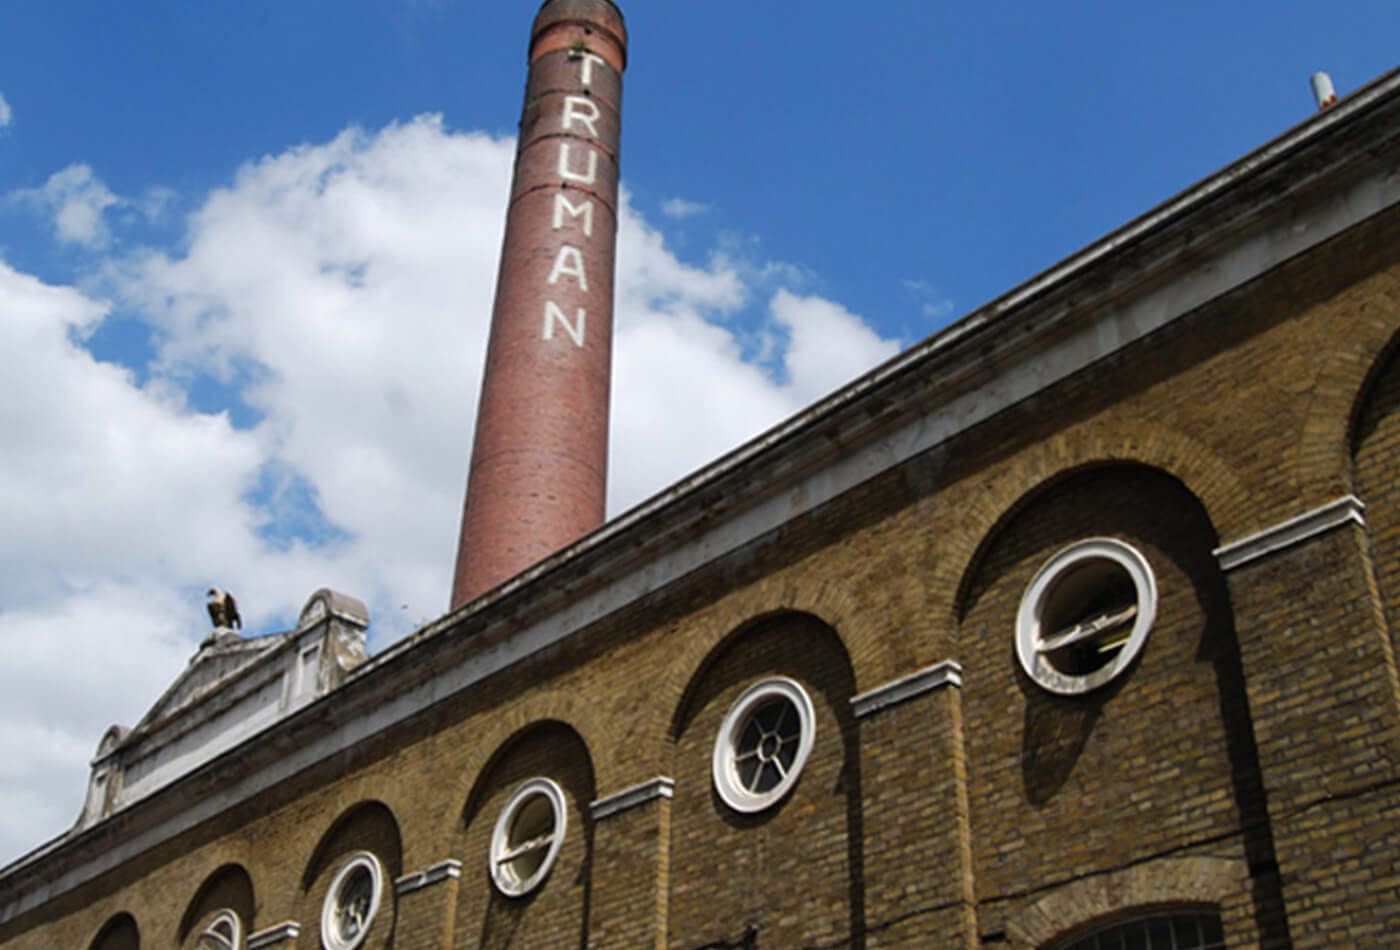 Outdoor shot of building with large chimney and blue skies